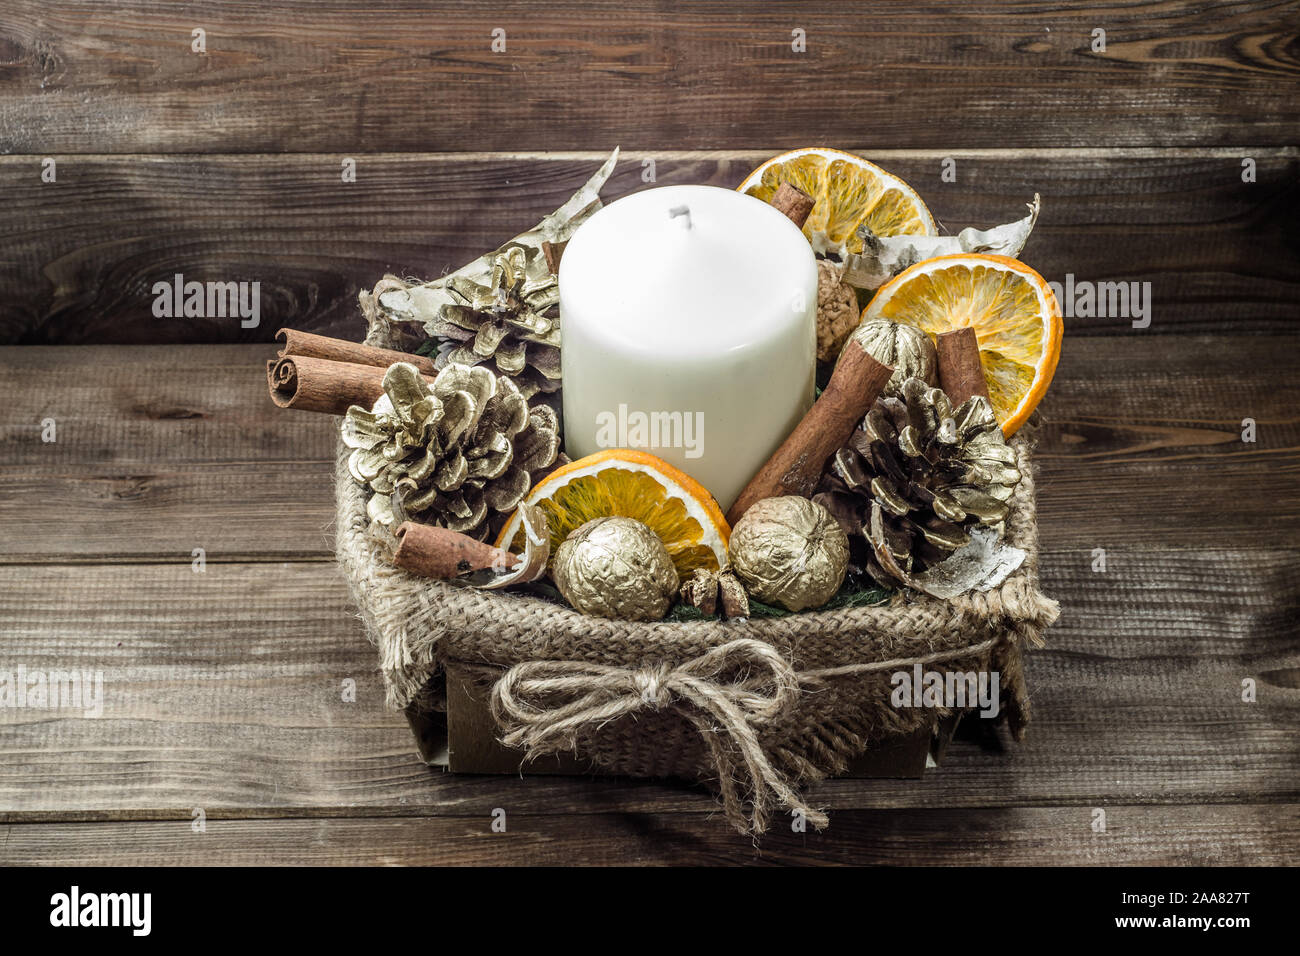 Christmas decoration, candle on wooden table with decorative dried fruits in a box Stock Photo